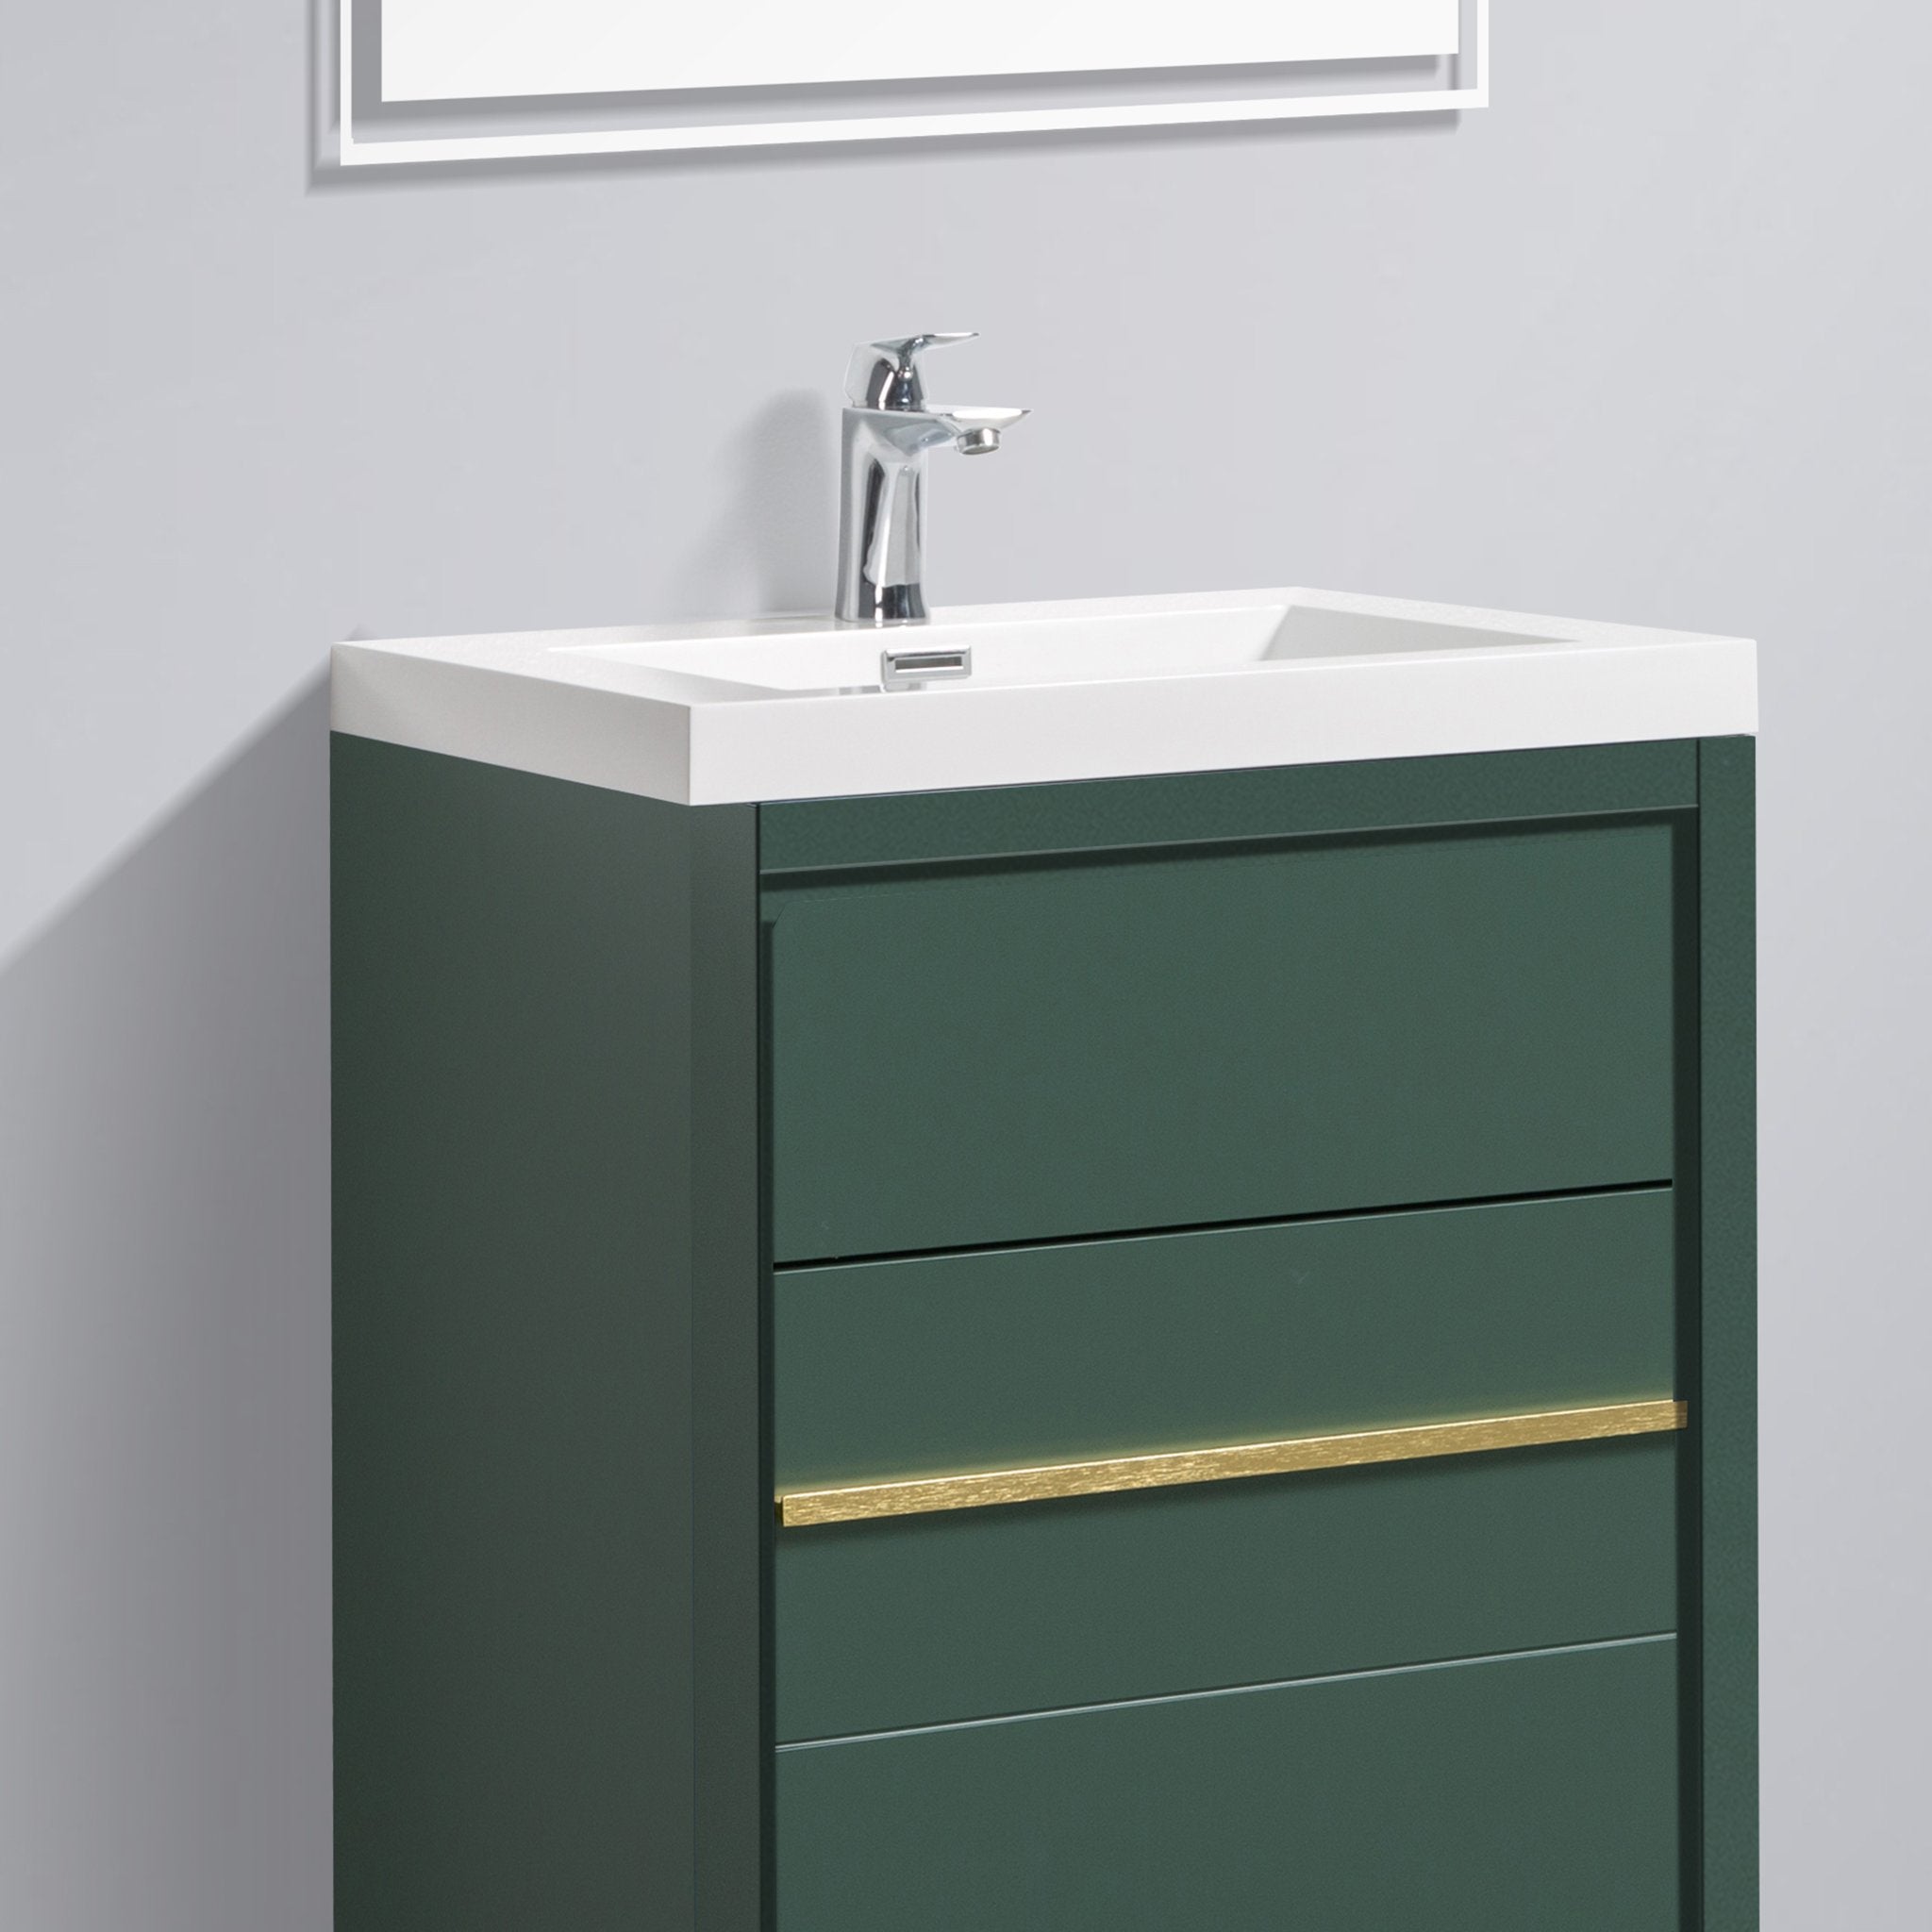 Granada 23.5 Nordic Green With Brush Gold Handle Cabinet, Square Cultured Marble Sink, Free Standing Modern Vanity Set